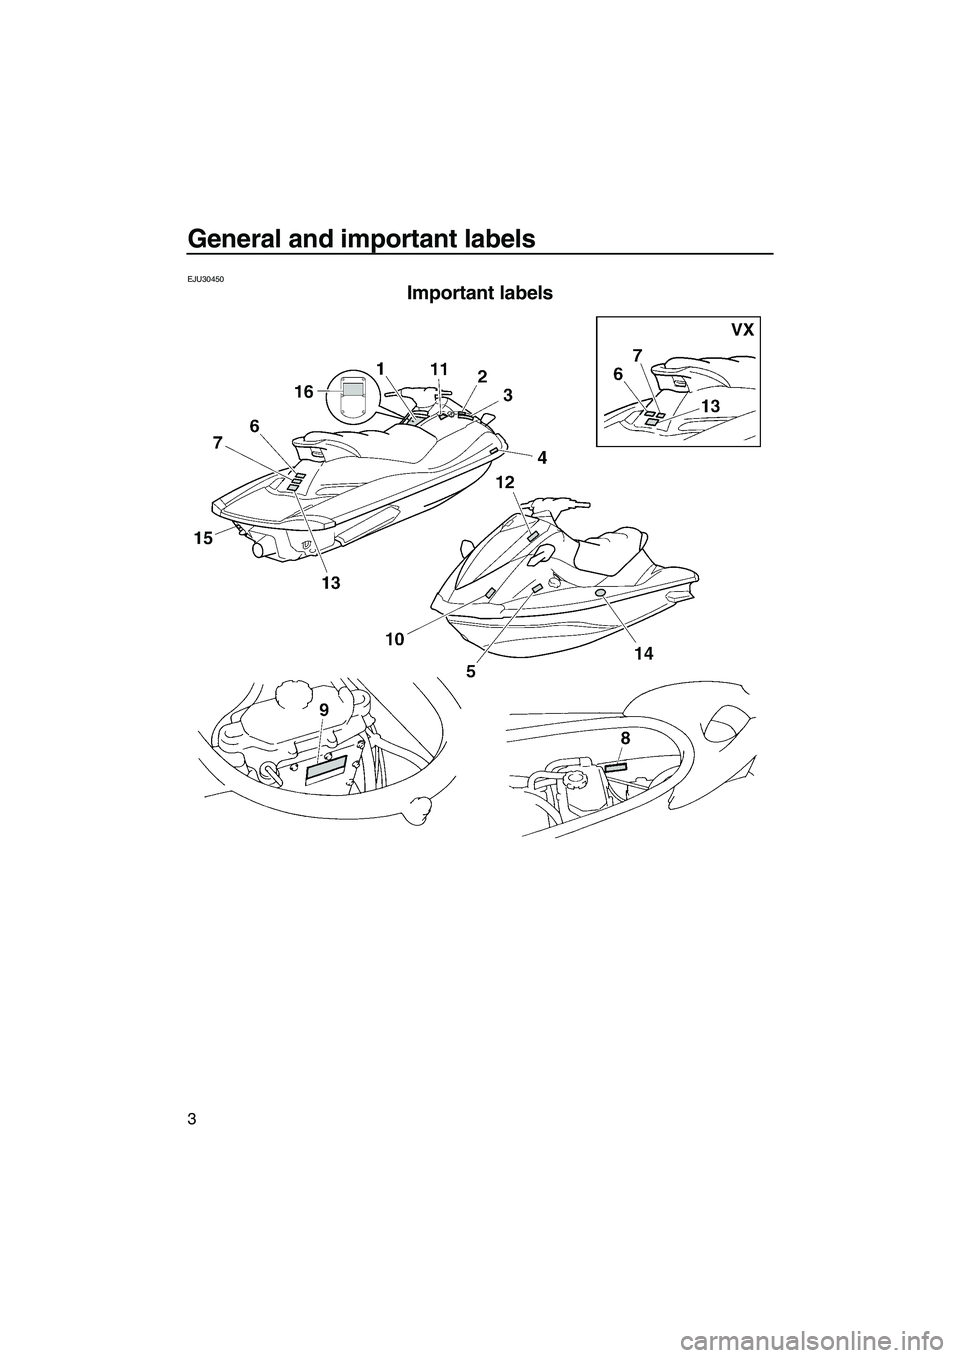 YAMAHA VX SPORT 2008  Owners Manual General and important labels
3
EJU30450
Important labels 
UF1K73E0.book  Page 3  Wednesday, July 11, 2007  9:15 AM 